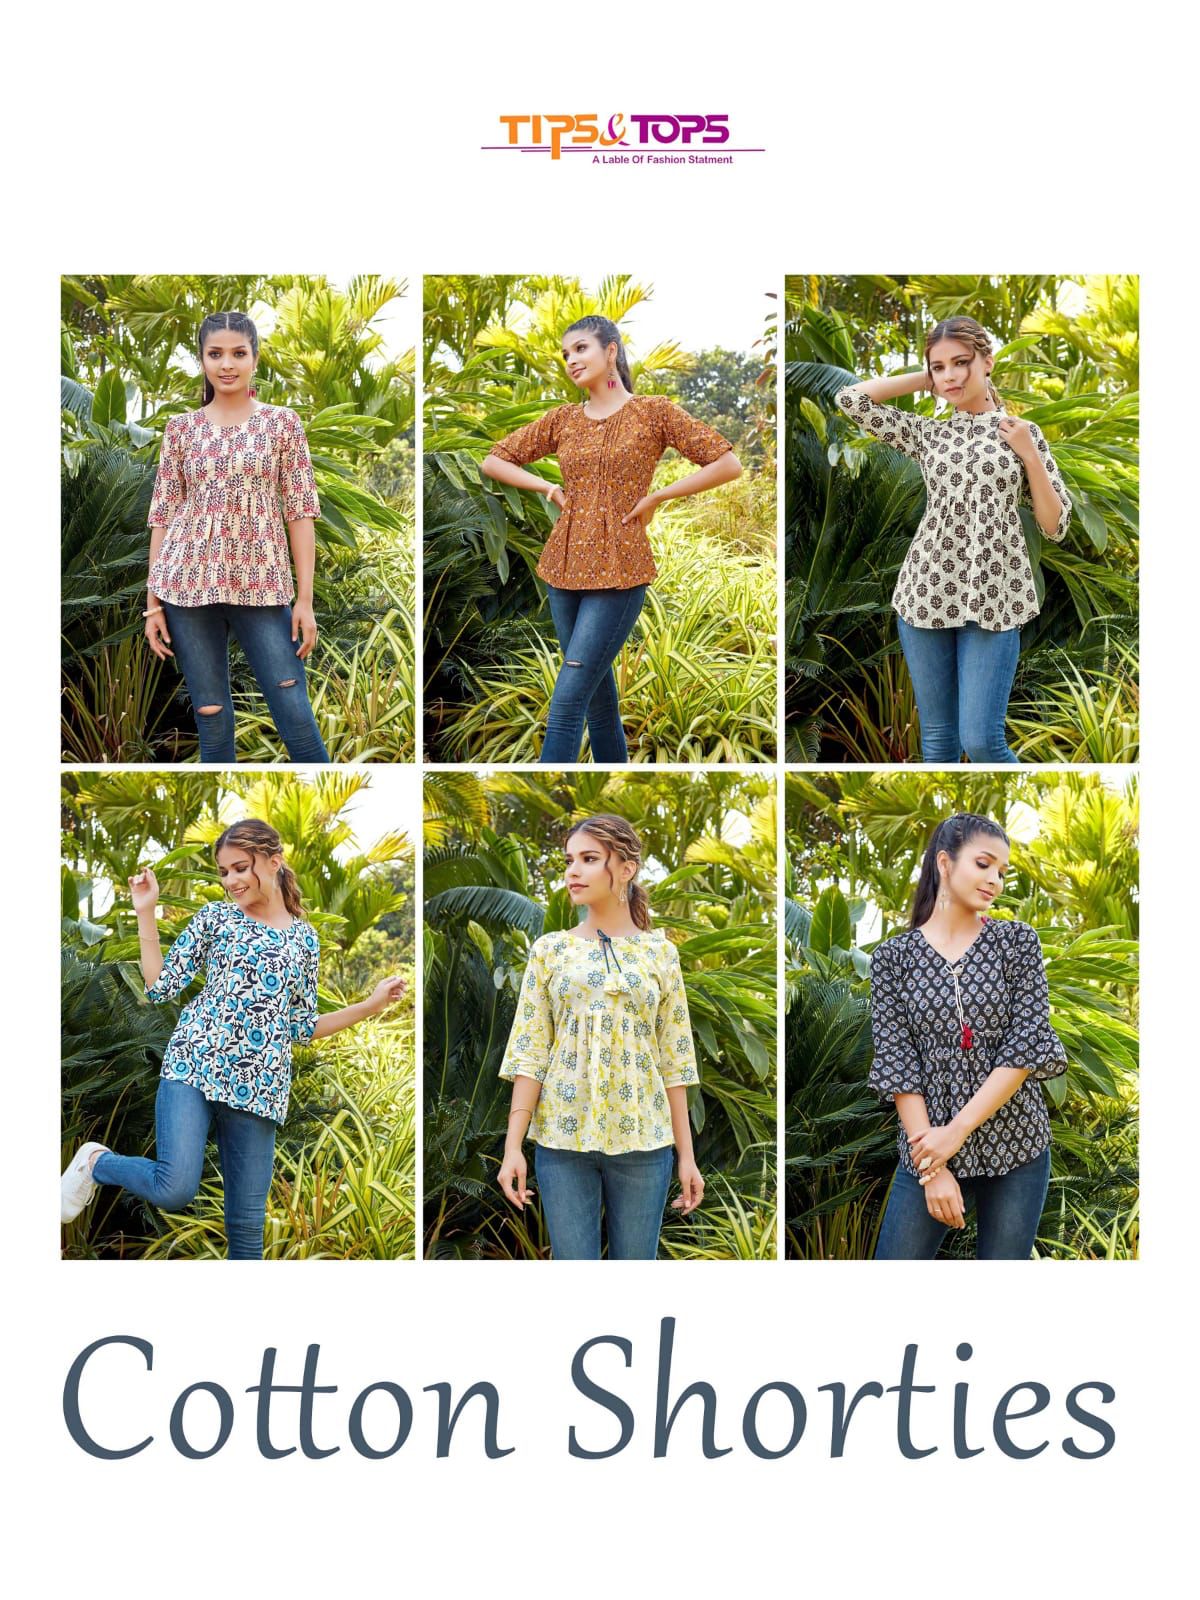 Tips And Tops Cotton Shorties 01-06